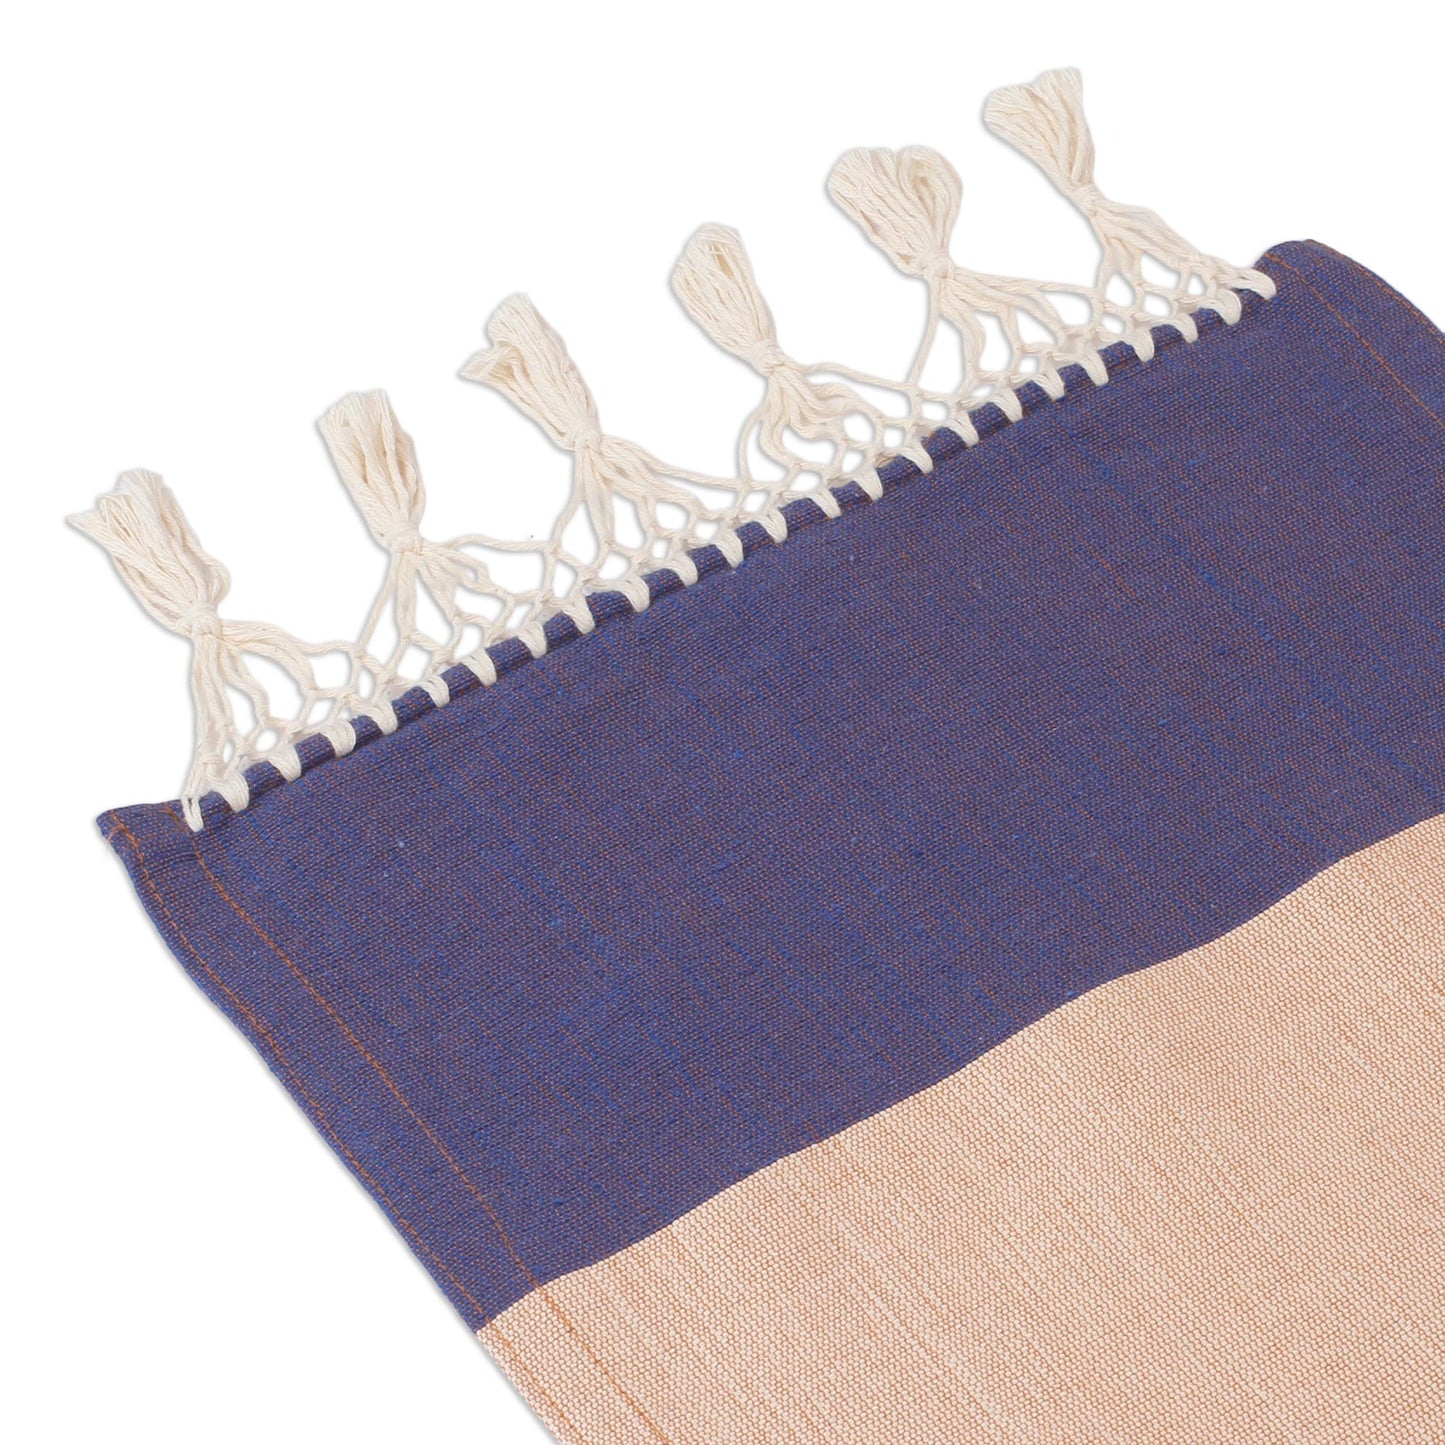 Blue-Violet Beach Cotton and Silk Blend Table Runner Blue-Violet and Beige